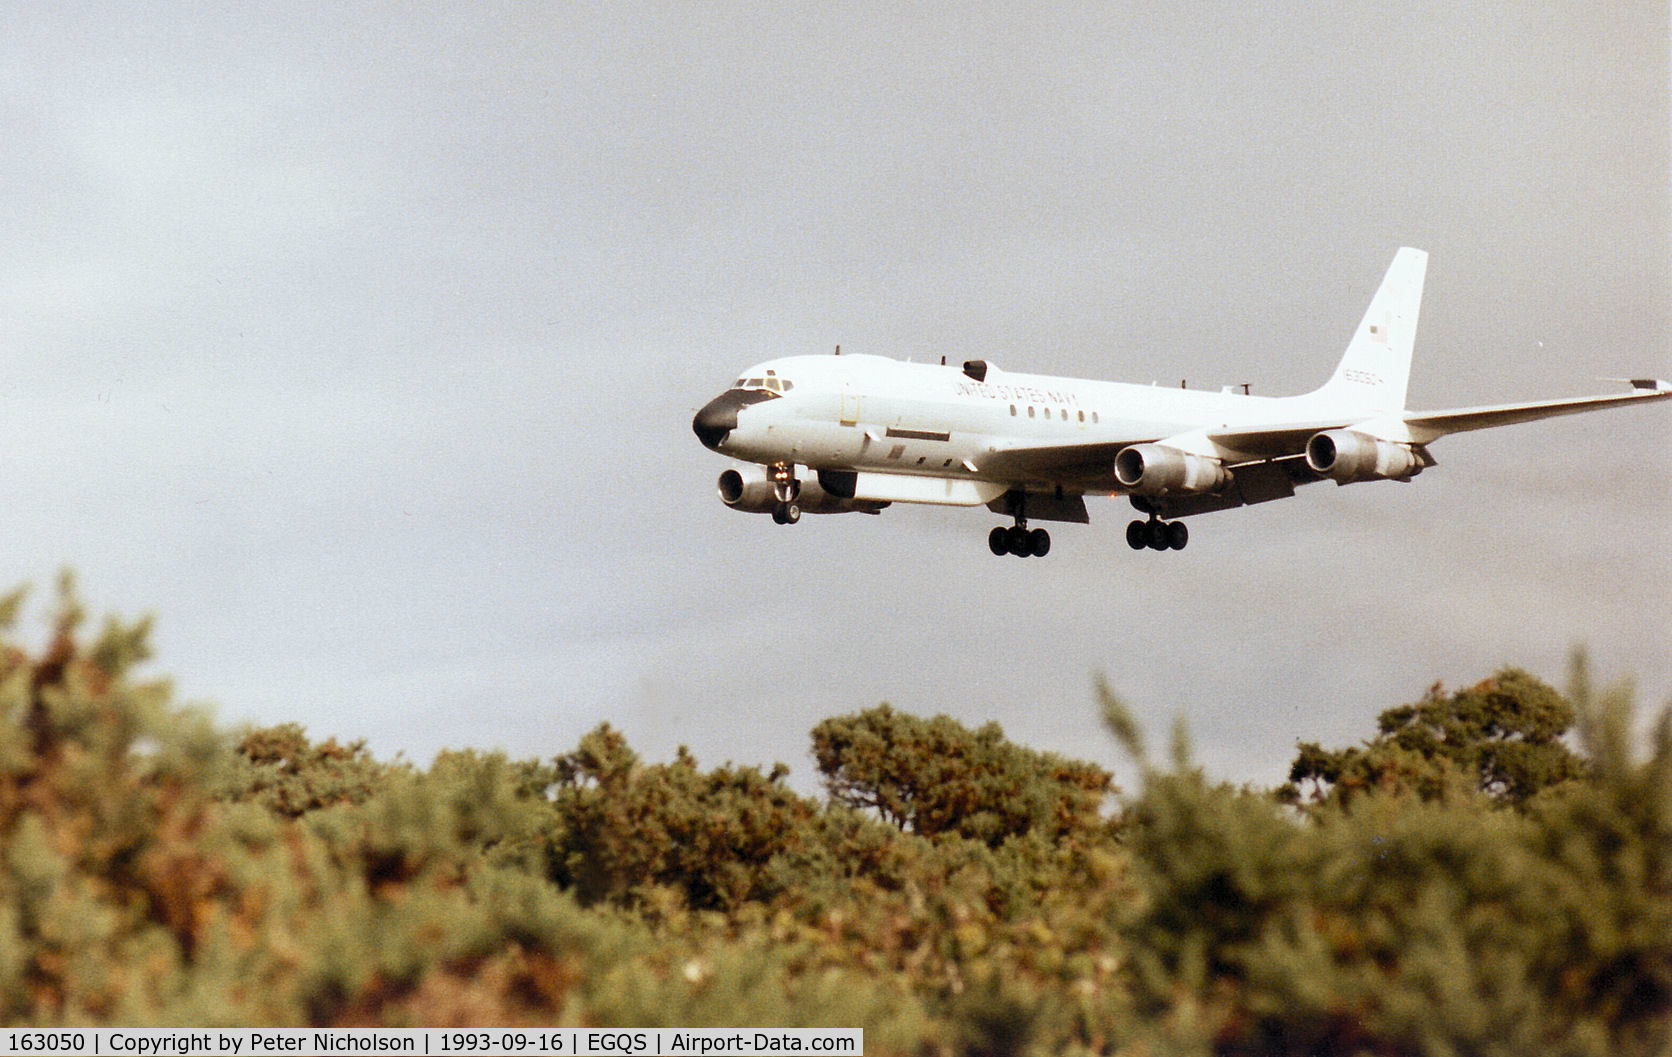 163050, 1966 McDonnell Douglas EC-24A (DC-8-54F) C/N 45881, United States Navy EC-24A returning to RAF Lossiemouth from an Exercise Solid Stance mission in September 1993.